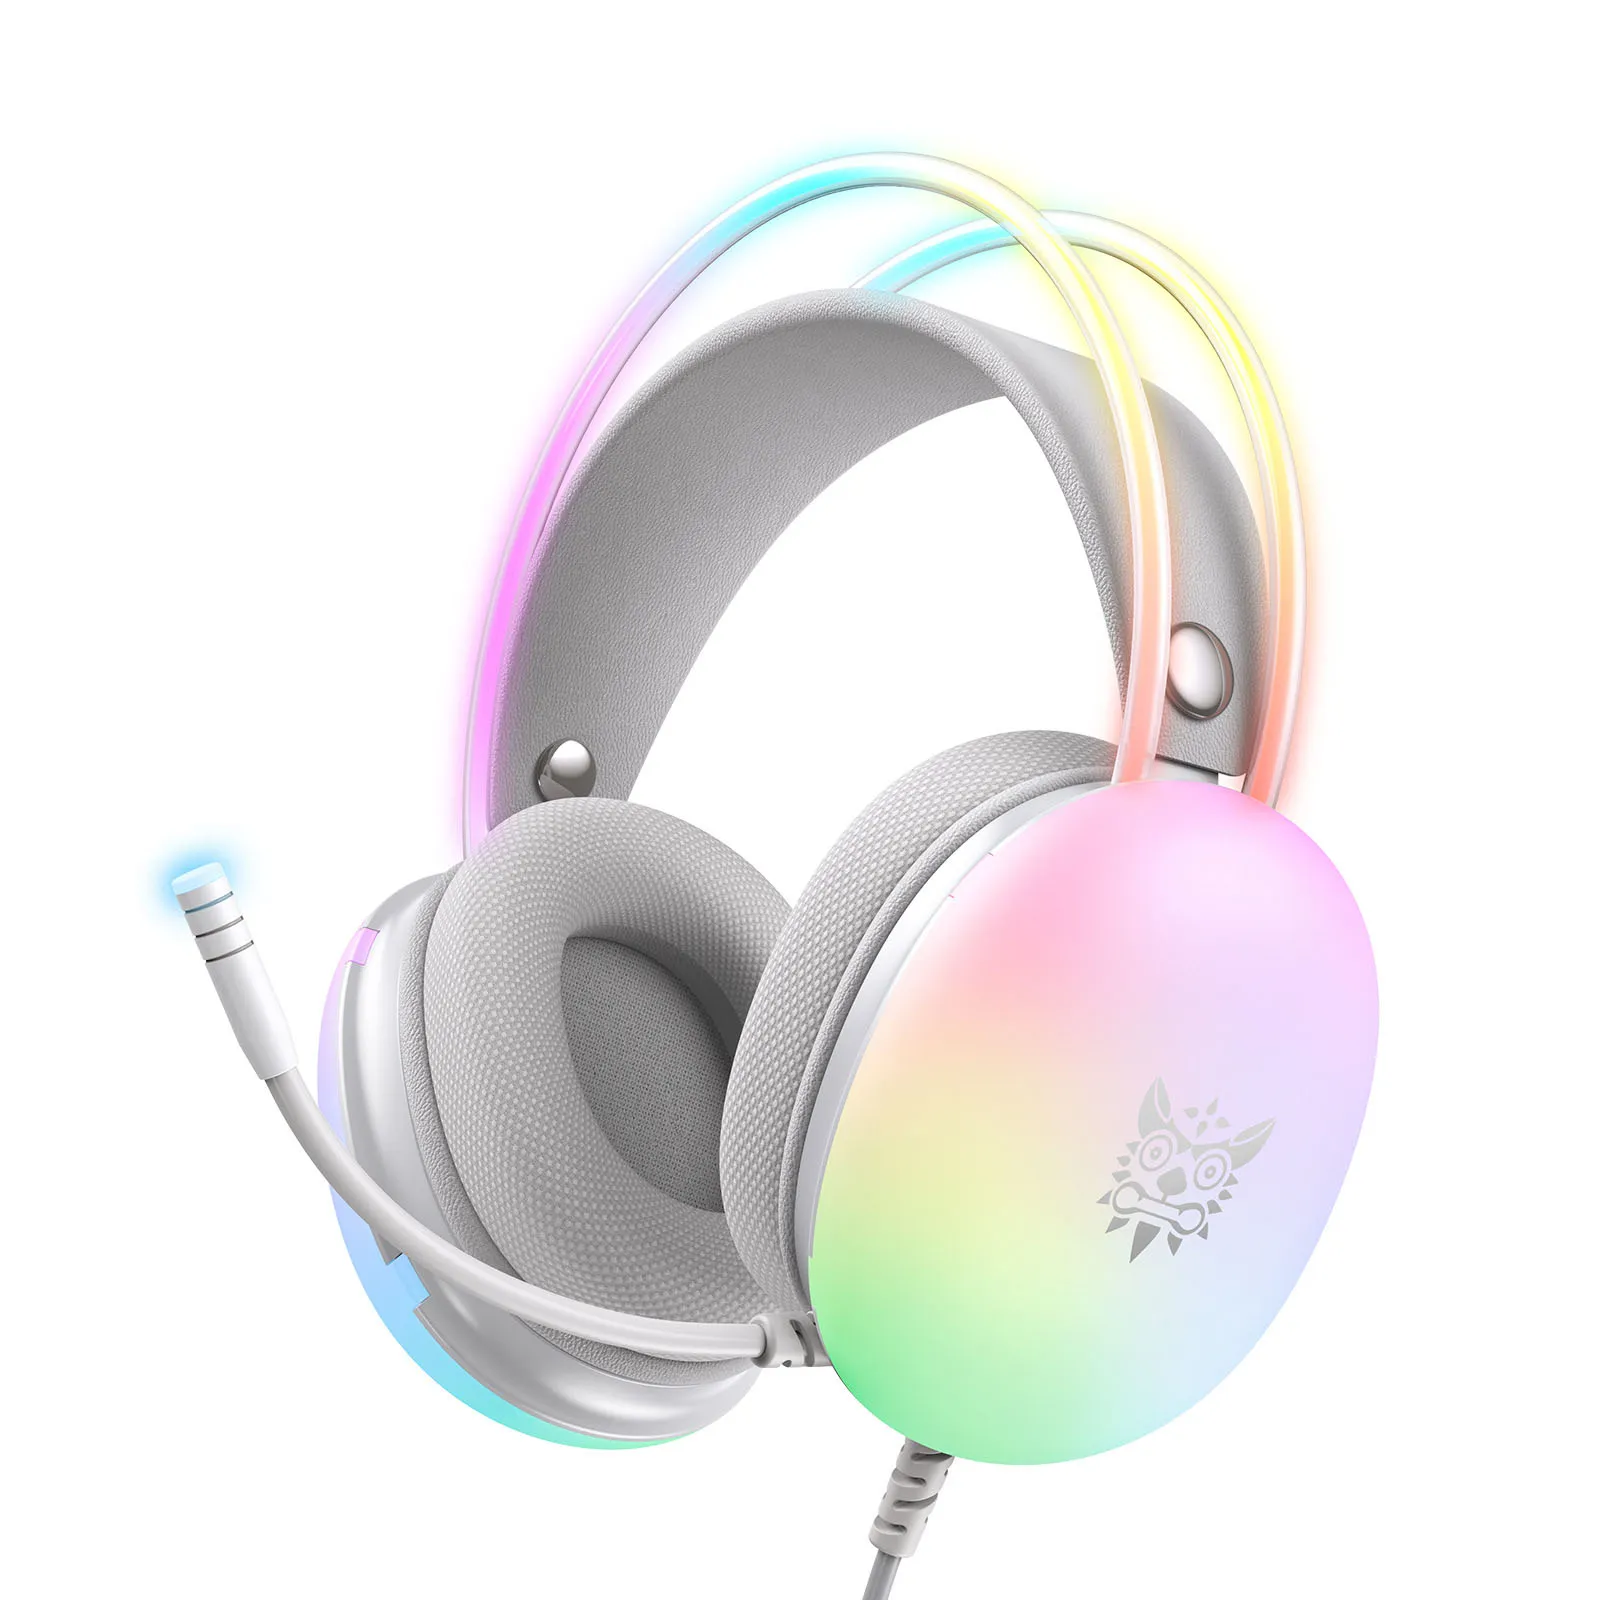 Headset with microphone Bass surround sound Noise canceling game headset Colorful light effect headset Gaming headset Wholesale headphones